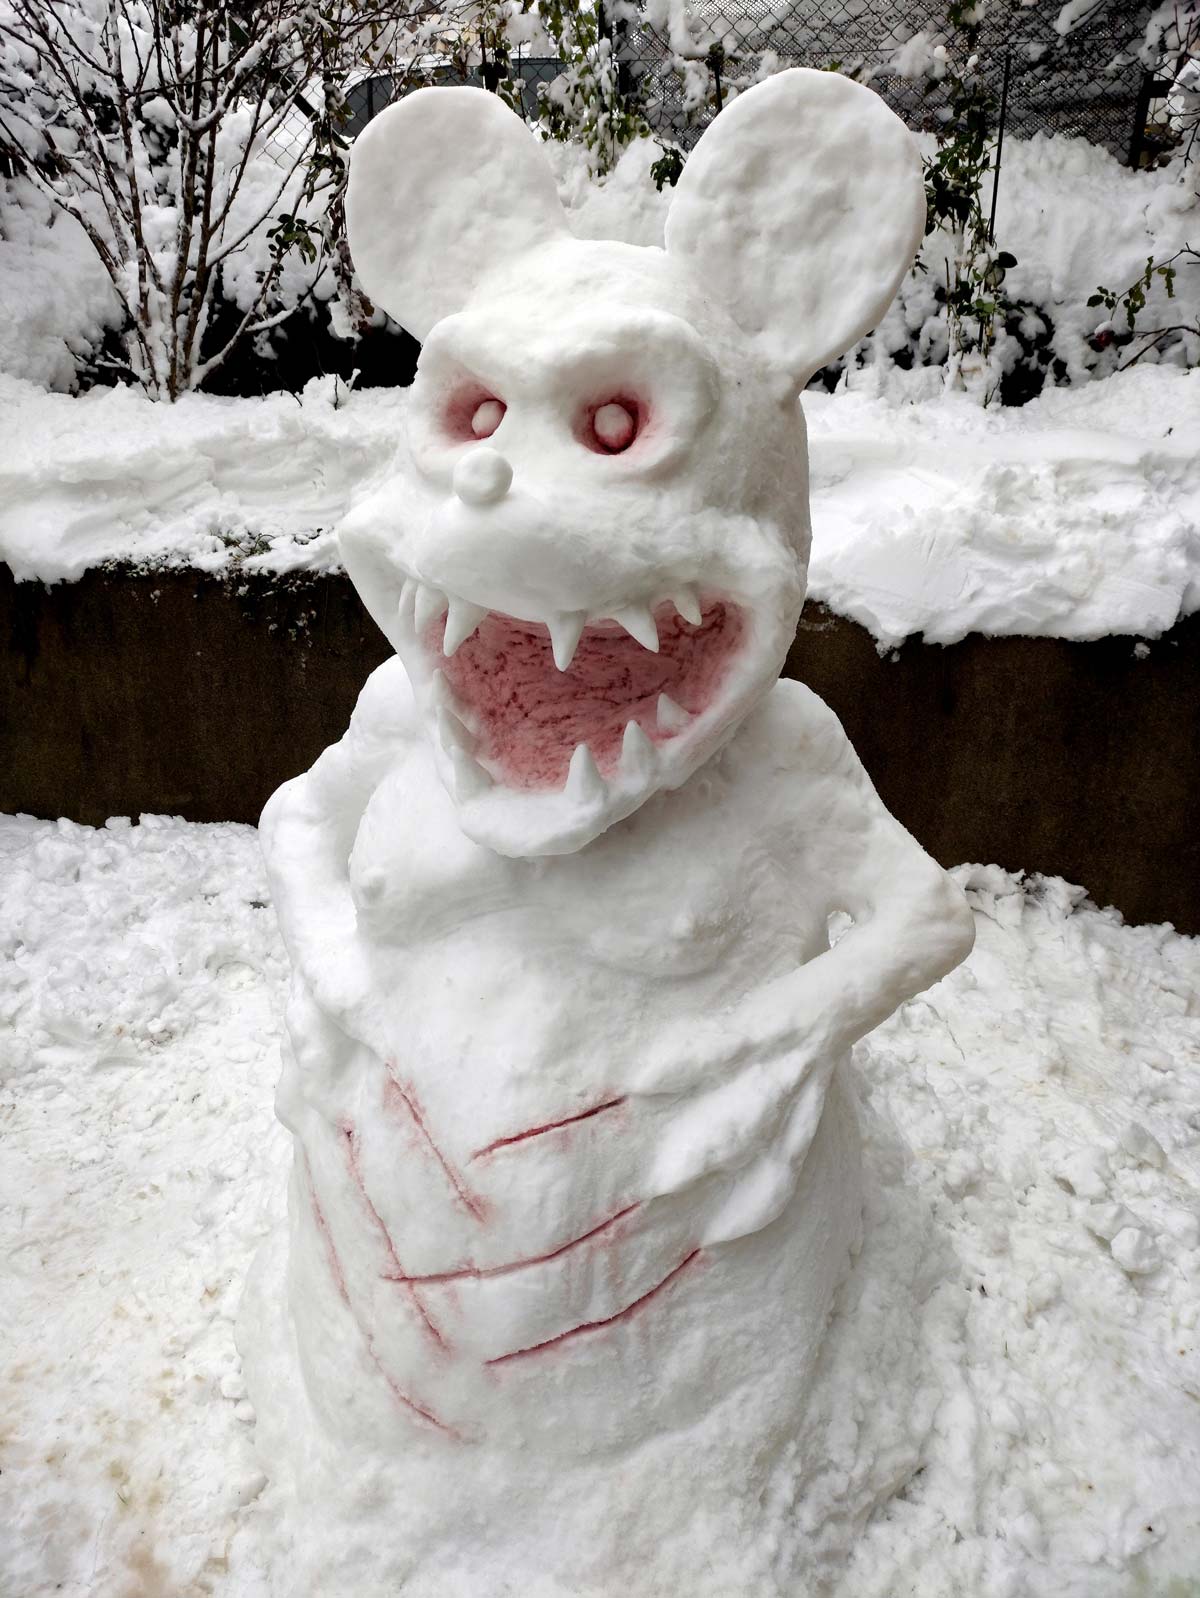 I just finished making Hickey the Snowmouse, neighbors are loving him